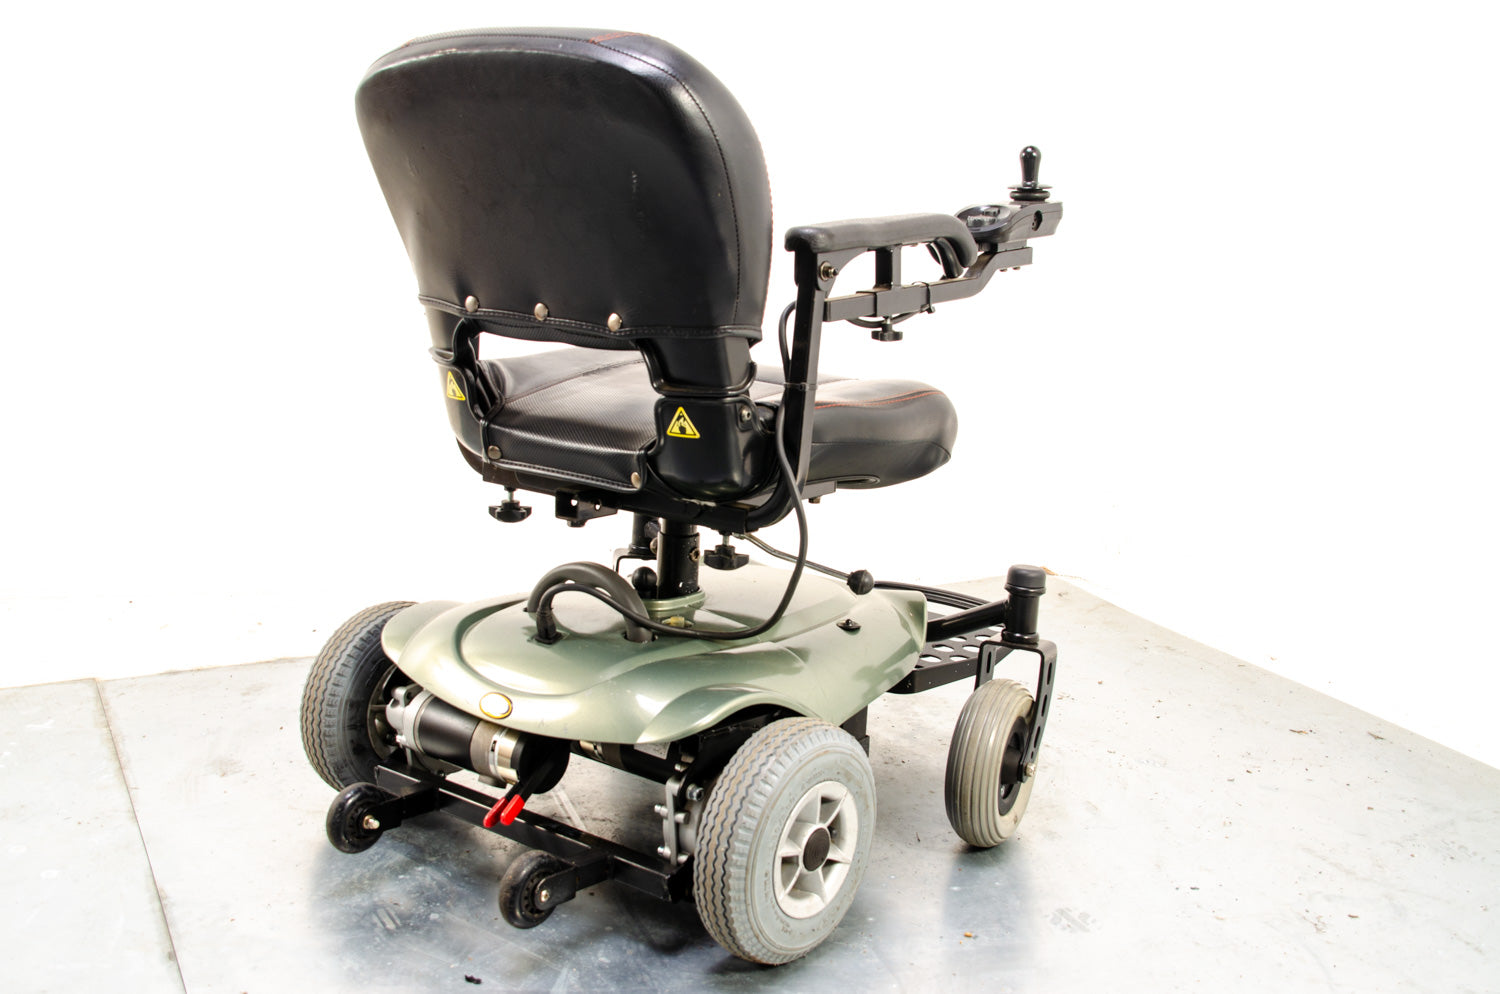 Kymco K-Chair Used Electric Wheelchair Powerchair Indoor Small Transportable Green